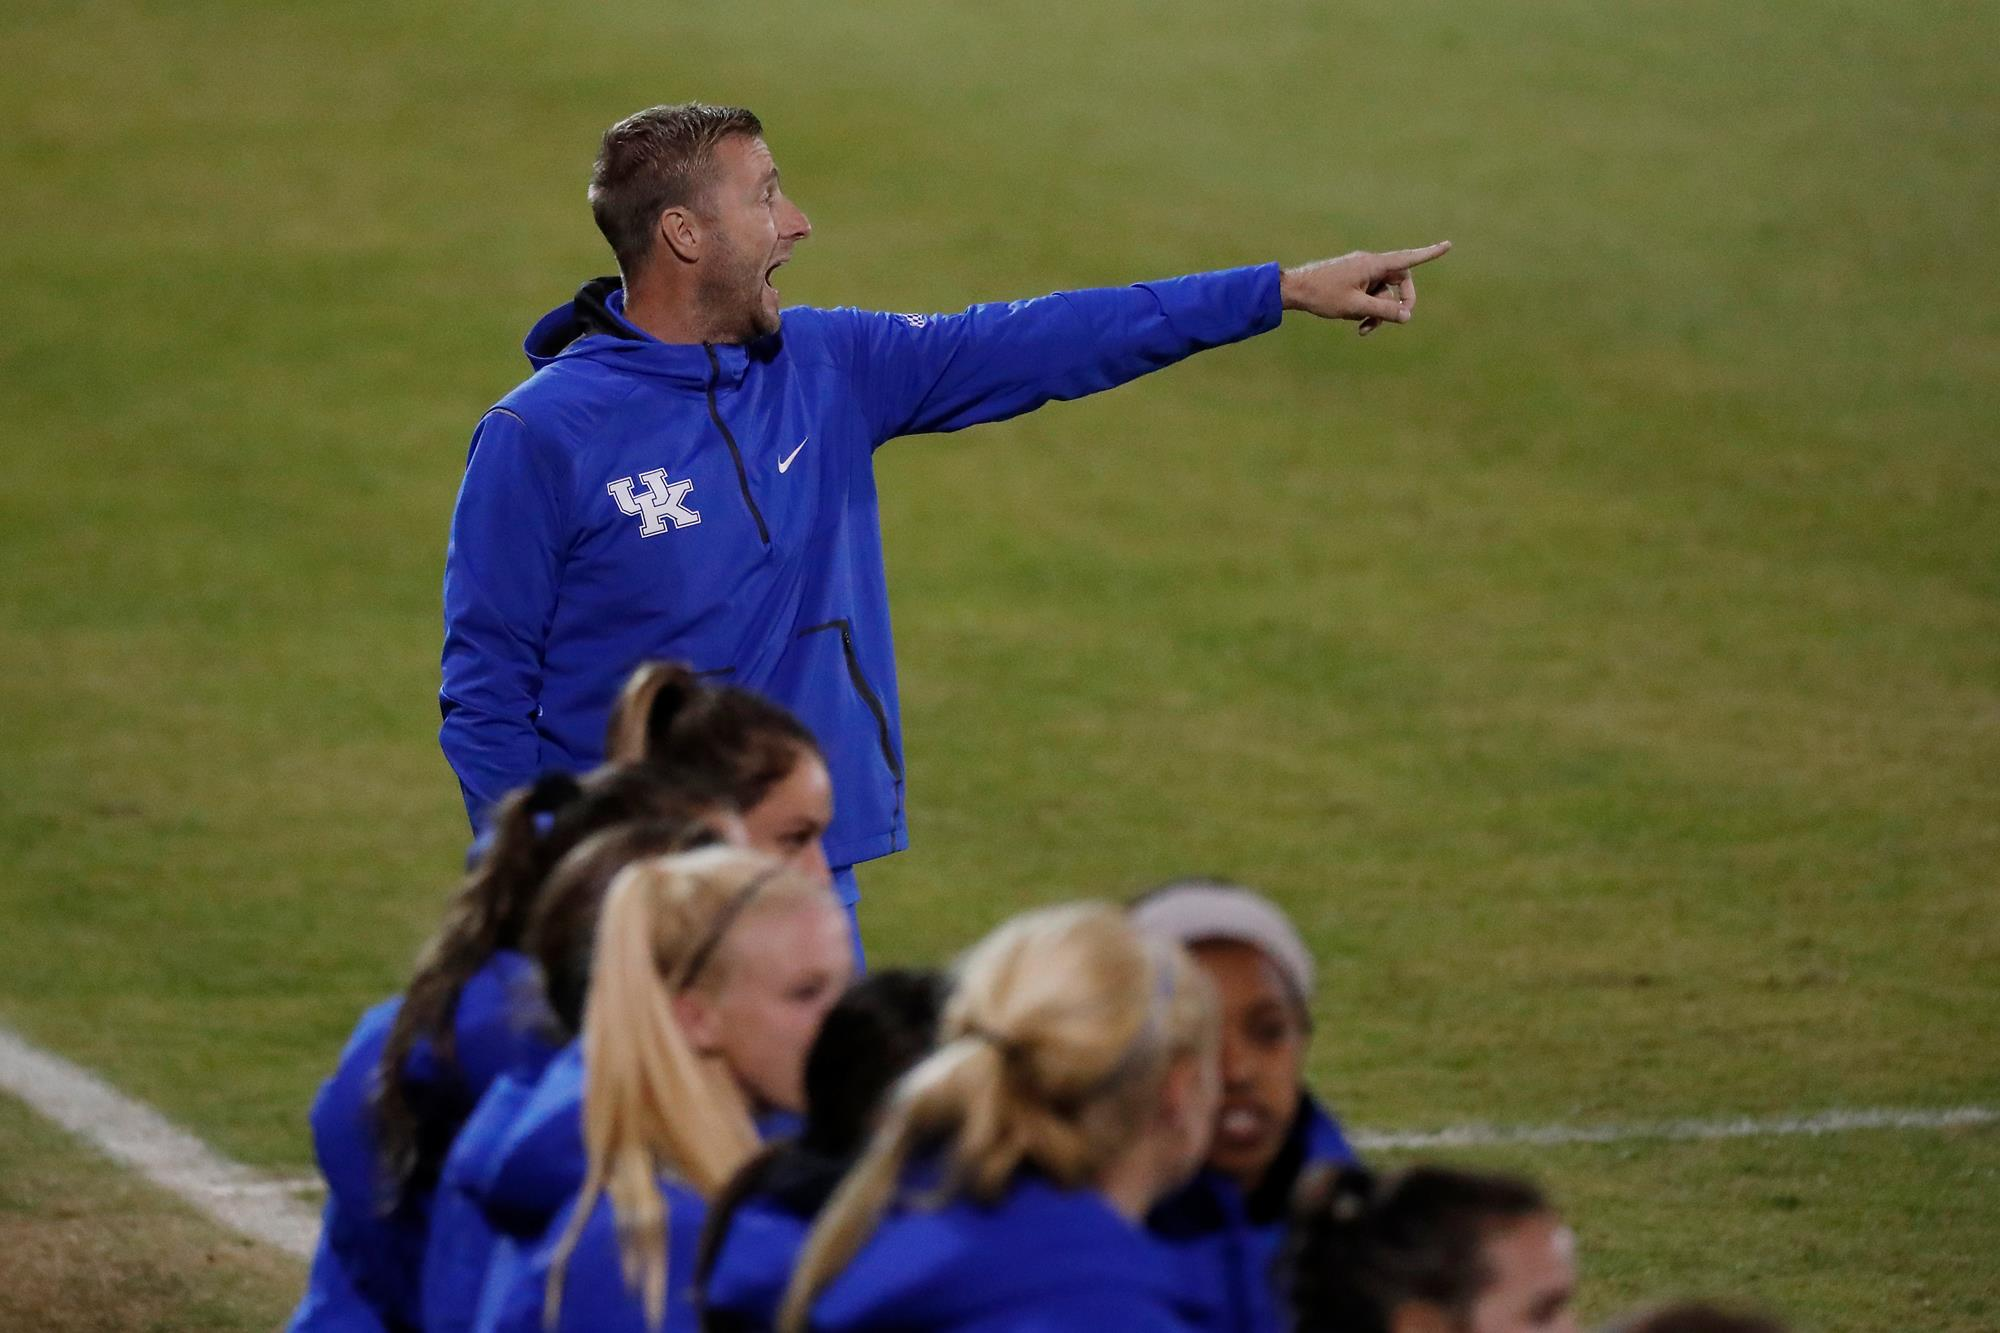 Kentucky to Hold Open Tryout on February 12